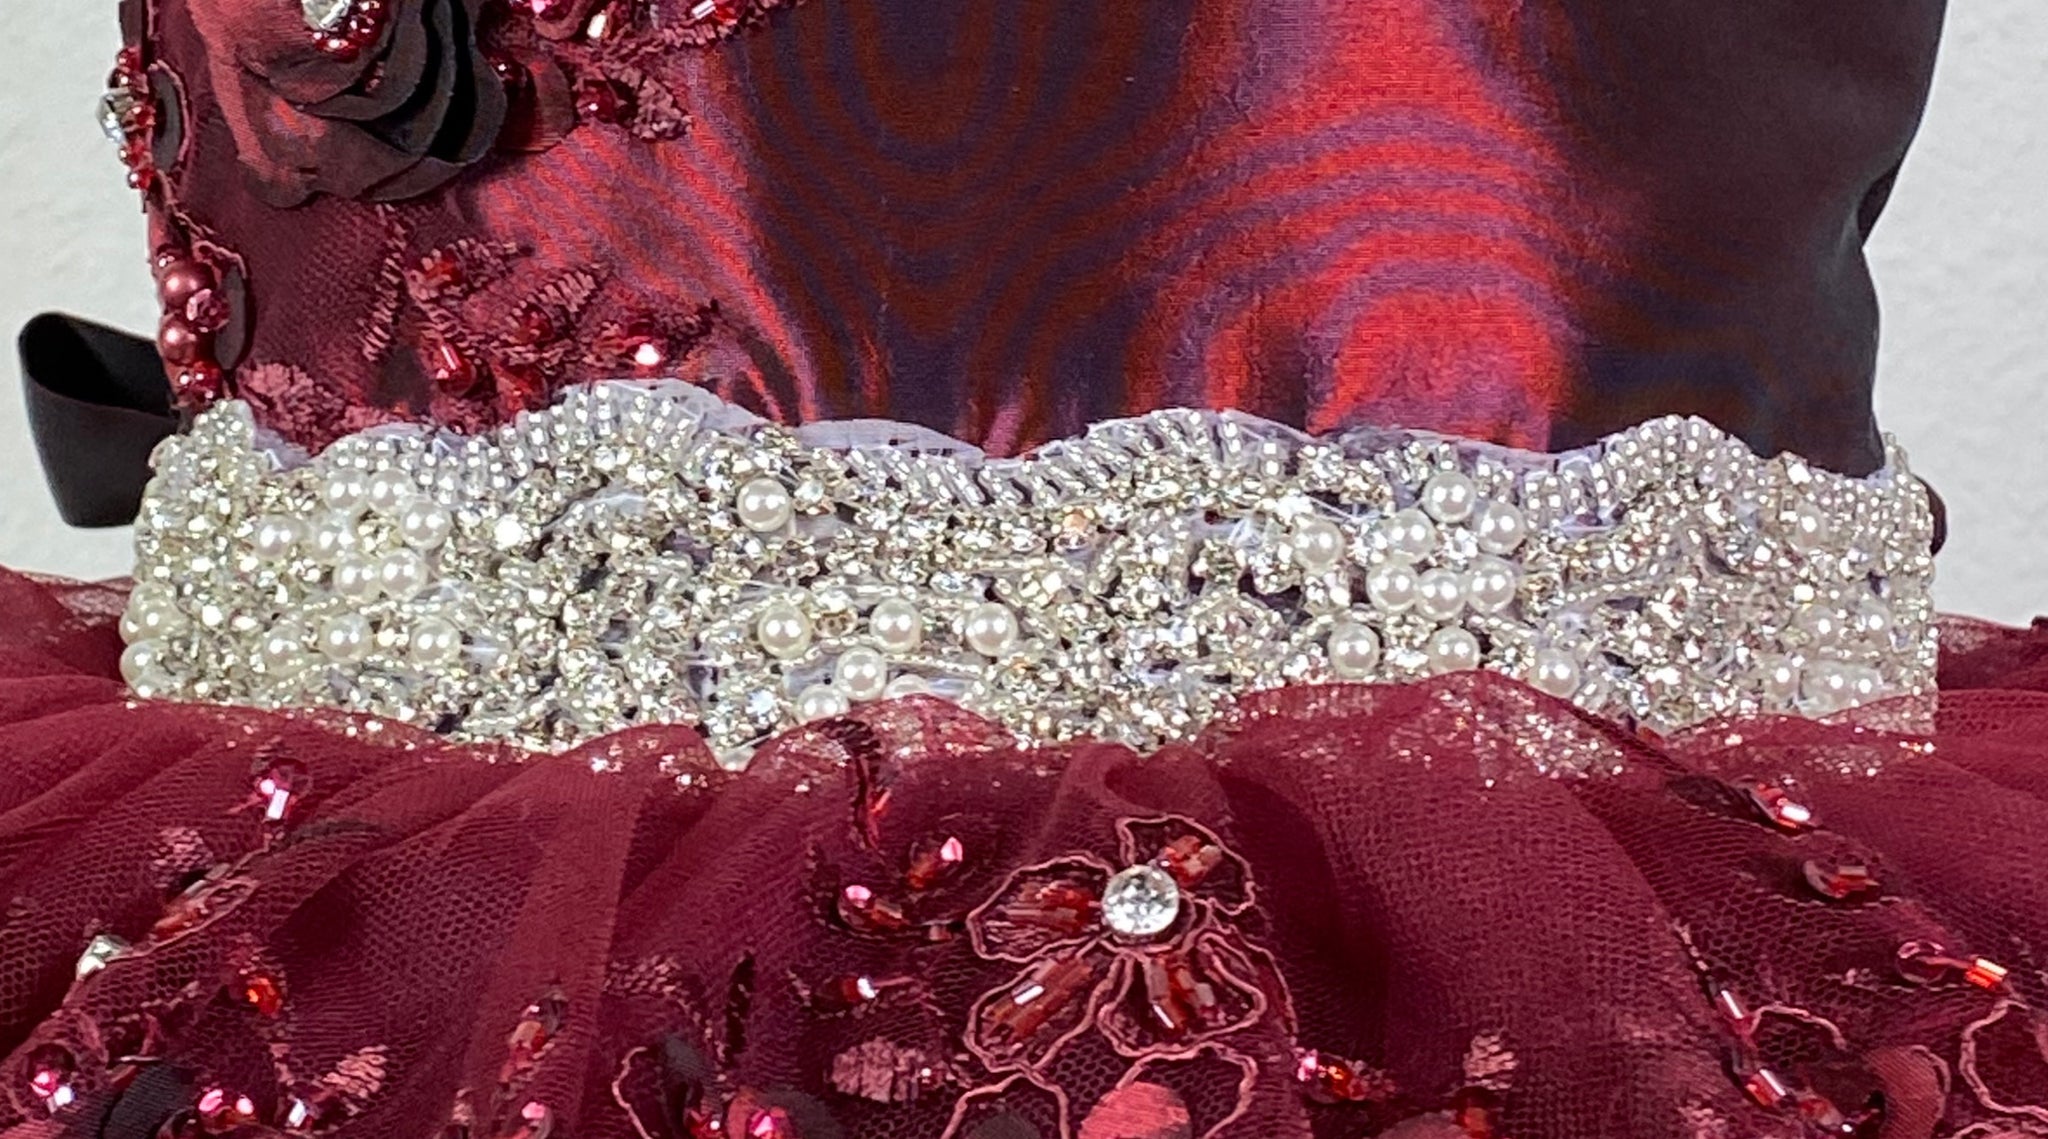 Burgundy, ivory, pink, or champagne scoop neck bodice Large flower placed on right shoulder with rhinestone detailing Embroidered flower applique under large flower Pearl and rhinestone band along lower bodice Satin skirting with tulle overlay Embroidered flower appliques along top of skirt, as well as trimming the edge of skirt Corset backing Burgundy, ivory, pink, or champagne ribbon for large bow Dress pictured with a petticoat